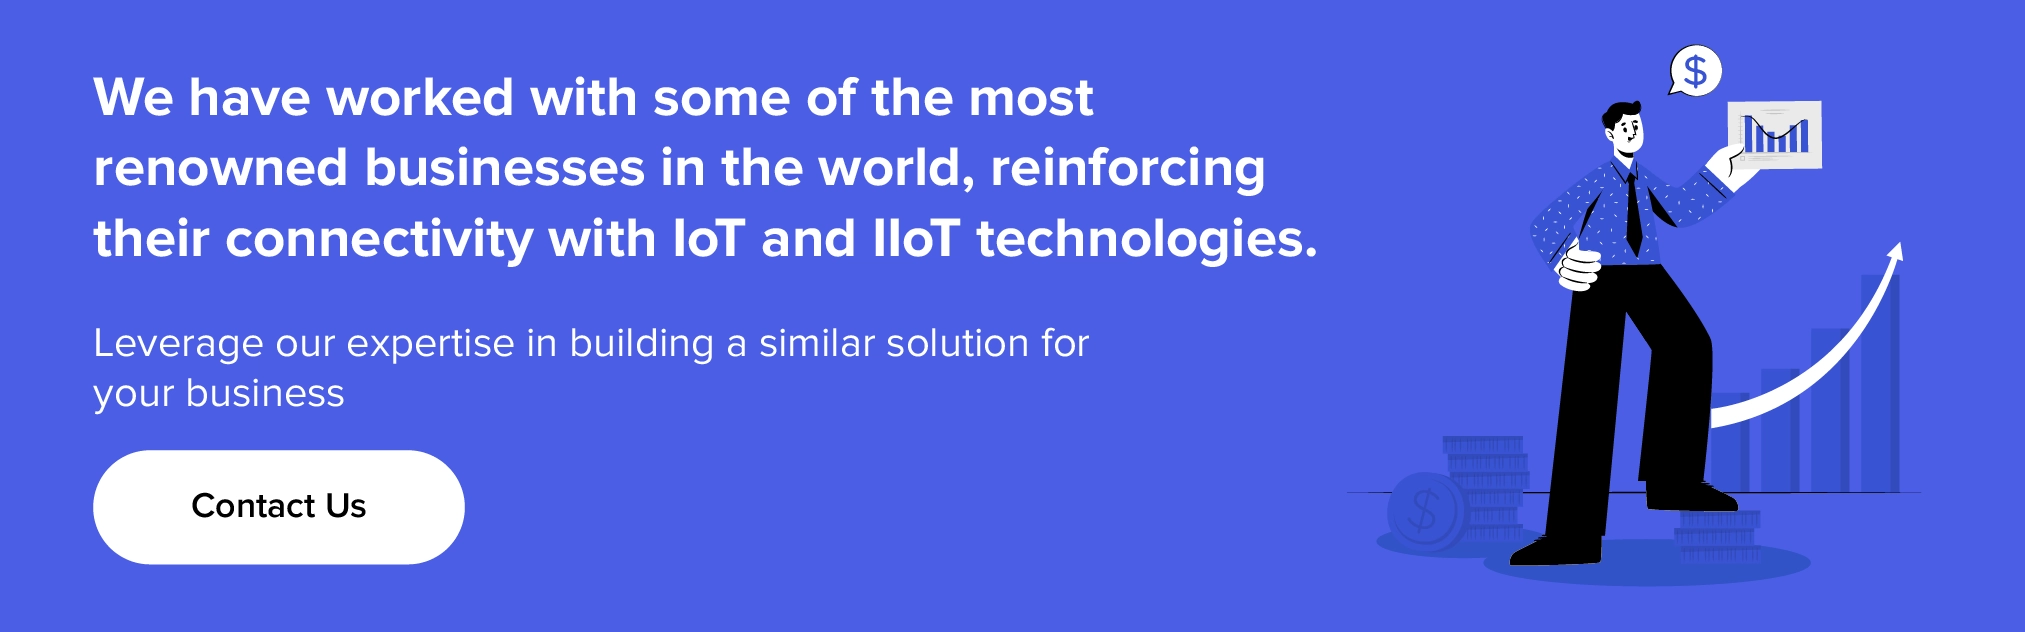 Contact us to build IoT and IIoT solutions for your business